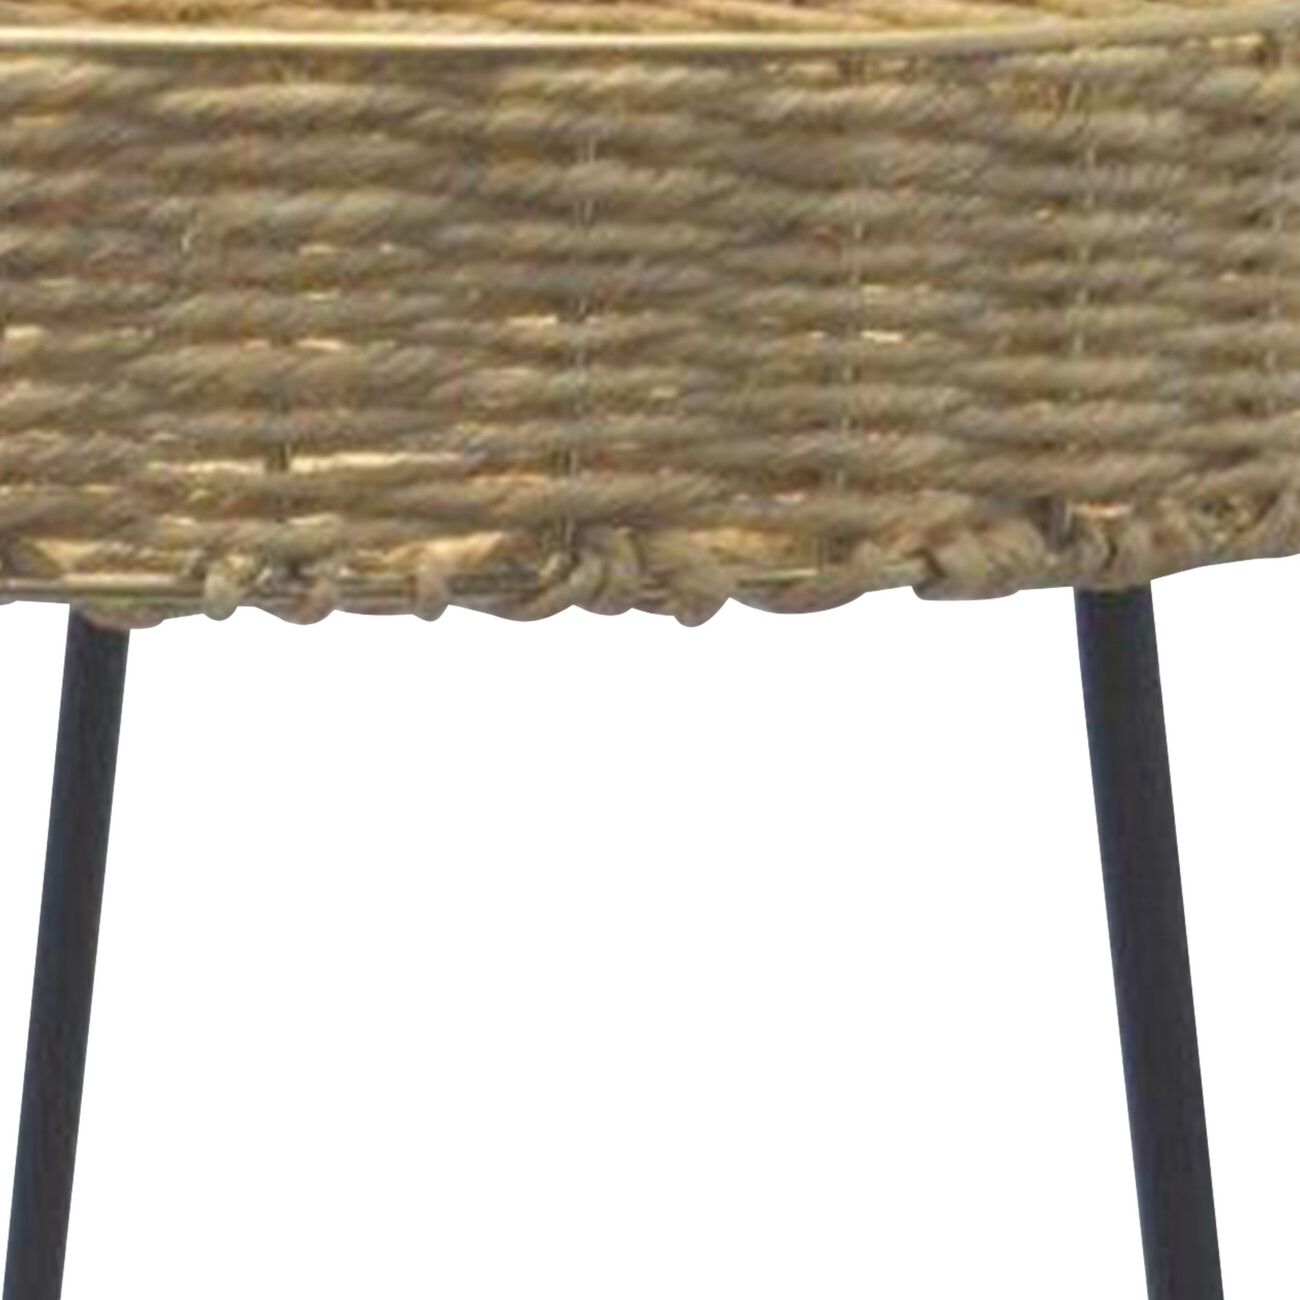 Round Tray Top Woven Rattan Coffee Table with Tubular Legs, Black and Brown